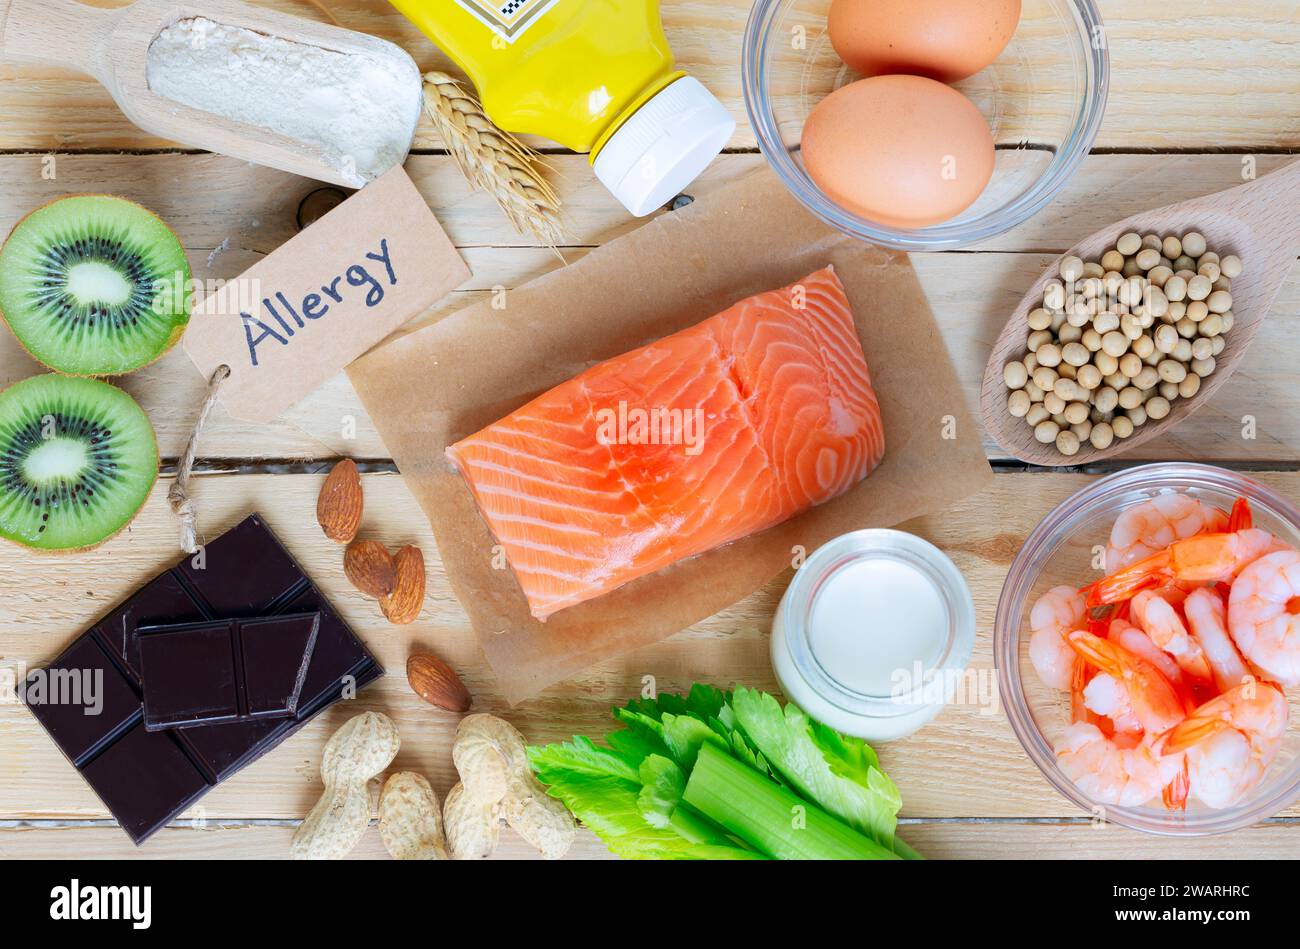 Composition with common food allergens including egg, milk, soya, nuts, fish, seafood, wheat flour, mustard, dried apricots and celery Stock Photo